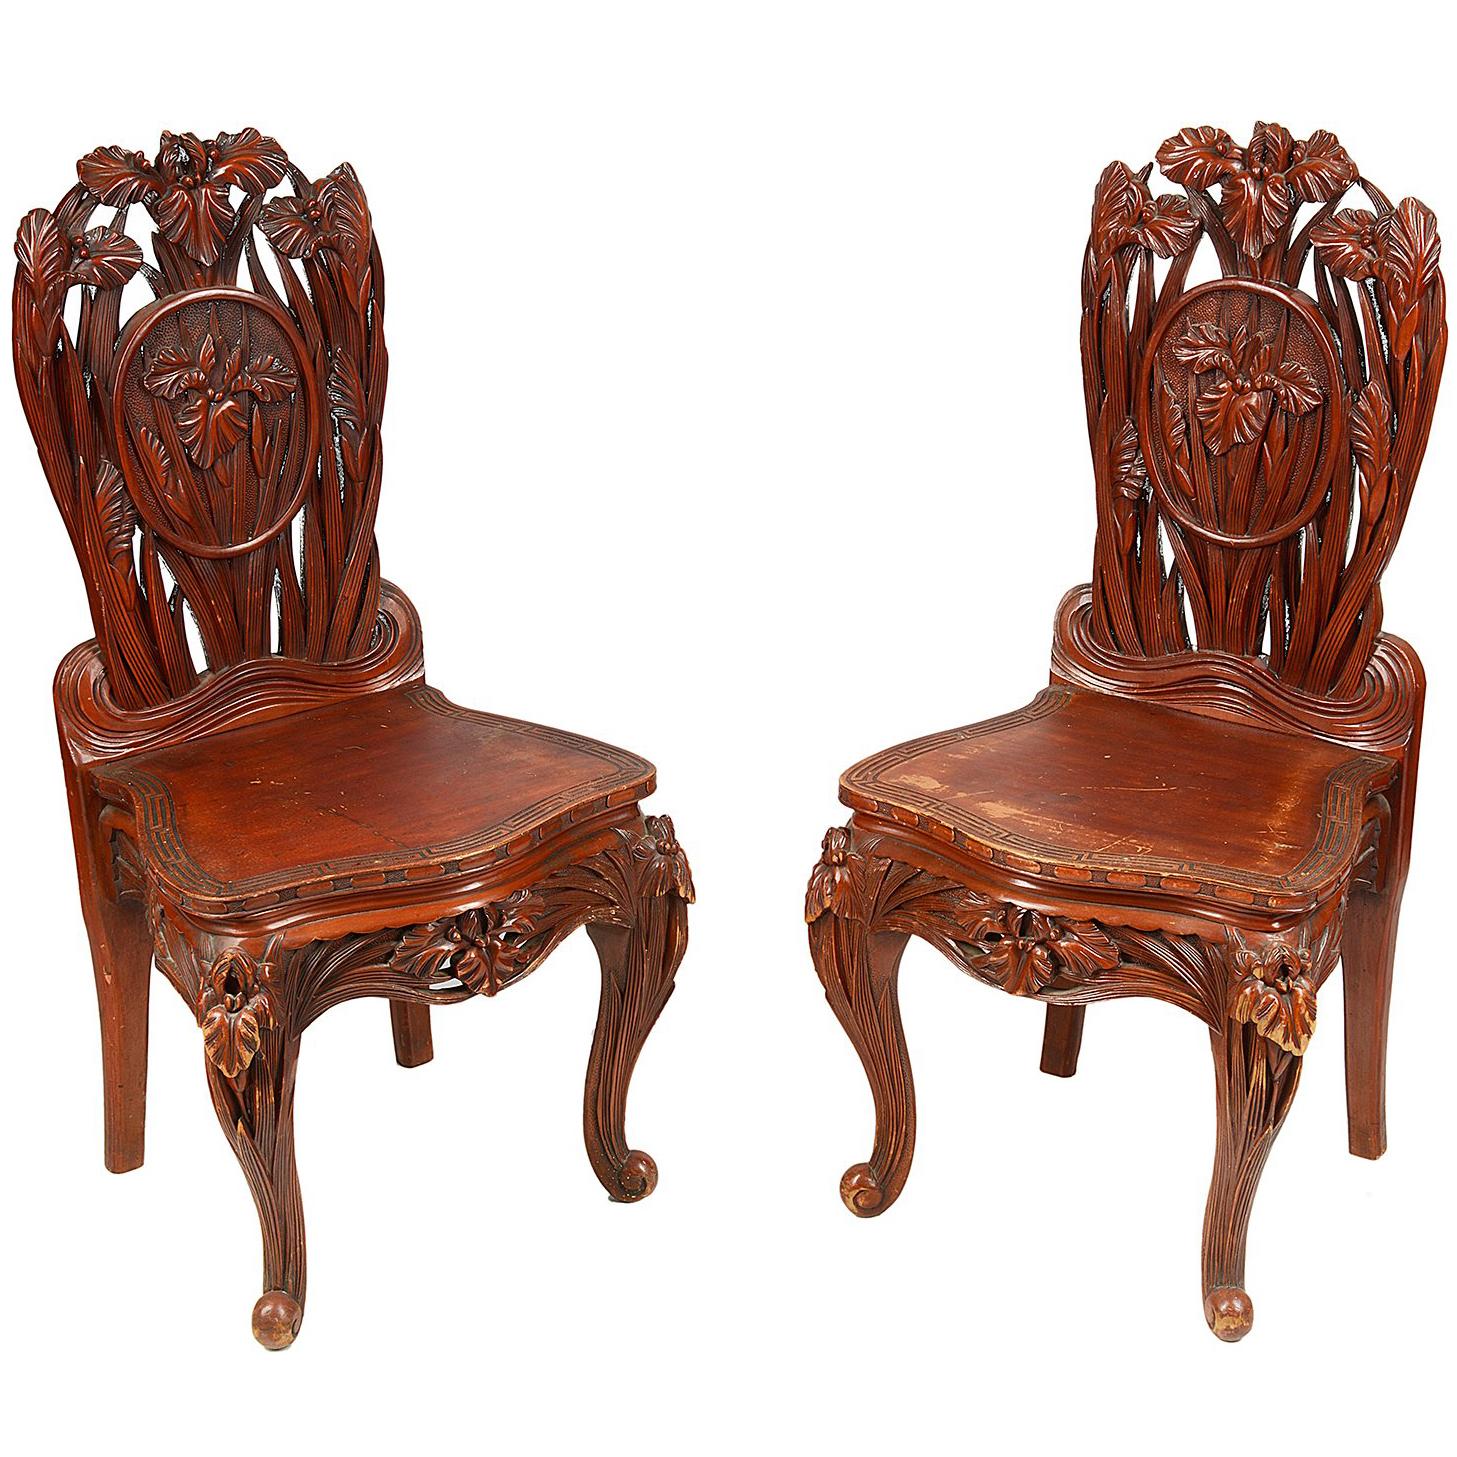 Pair of Oriental Chairs, 19th Century